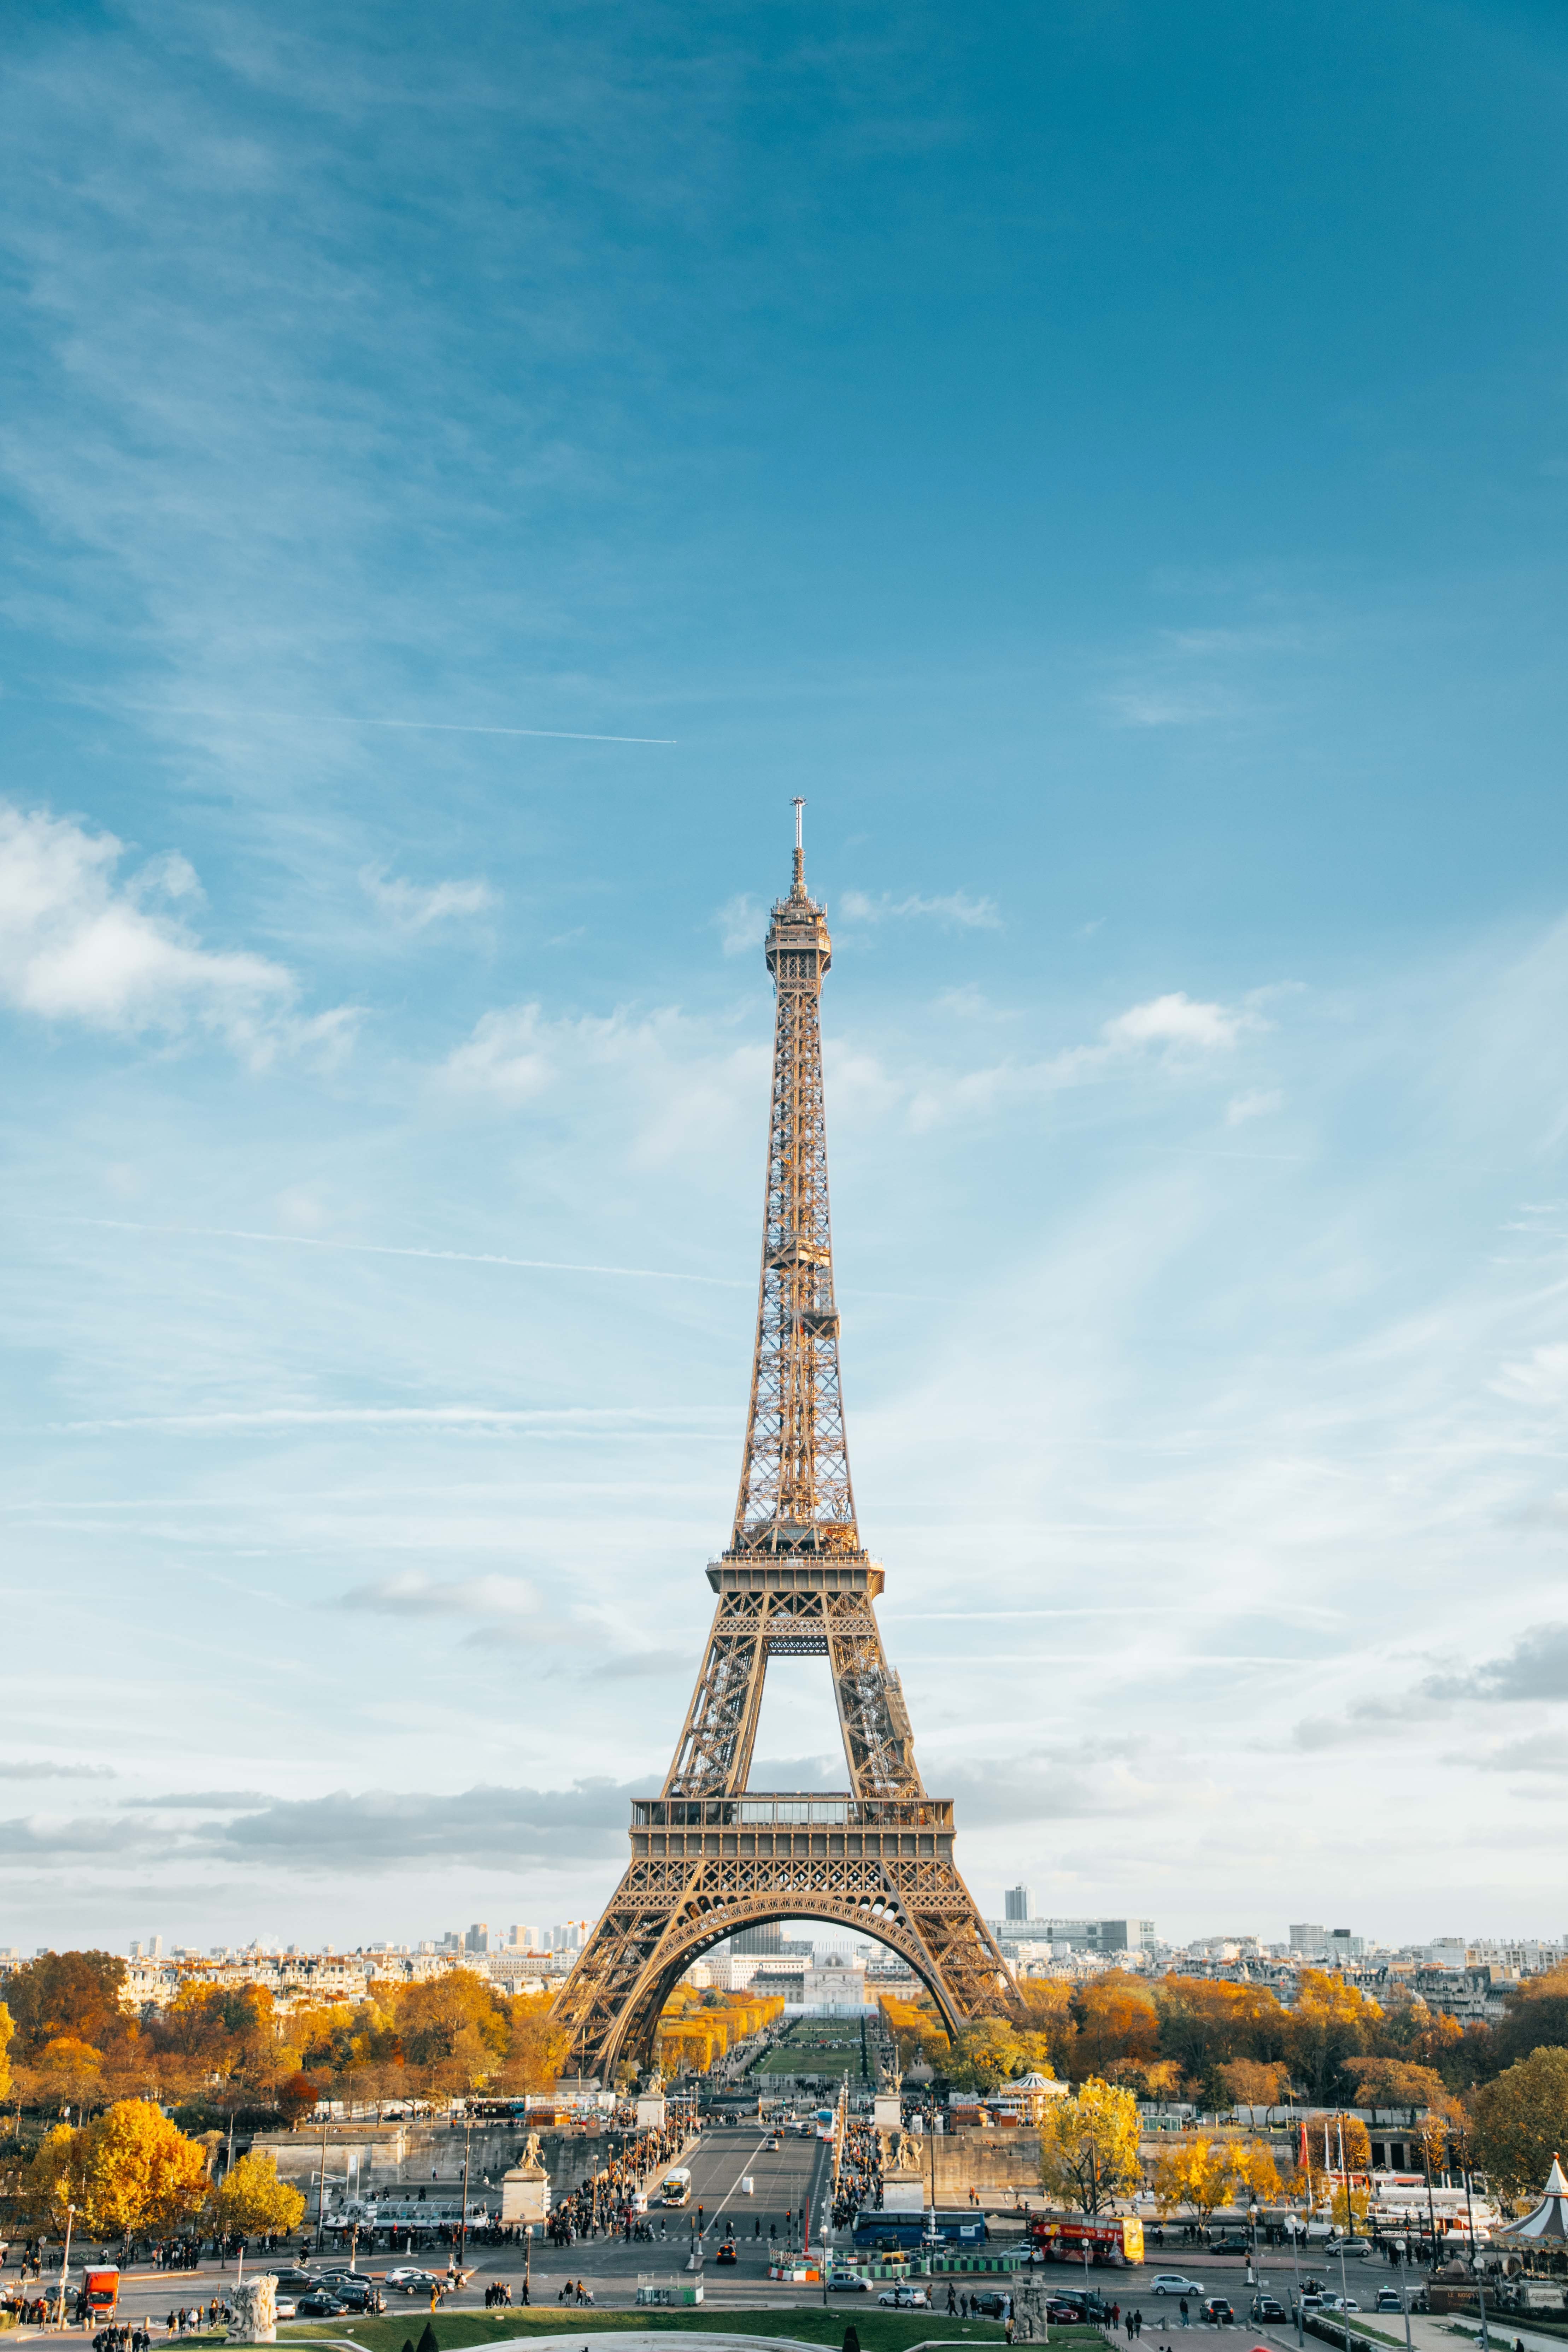 Vic was thrilled for their vacation to Paris. | Source: Unsplash